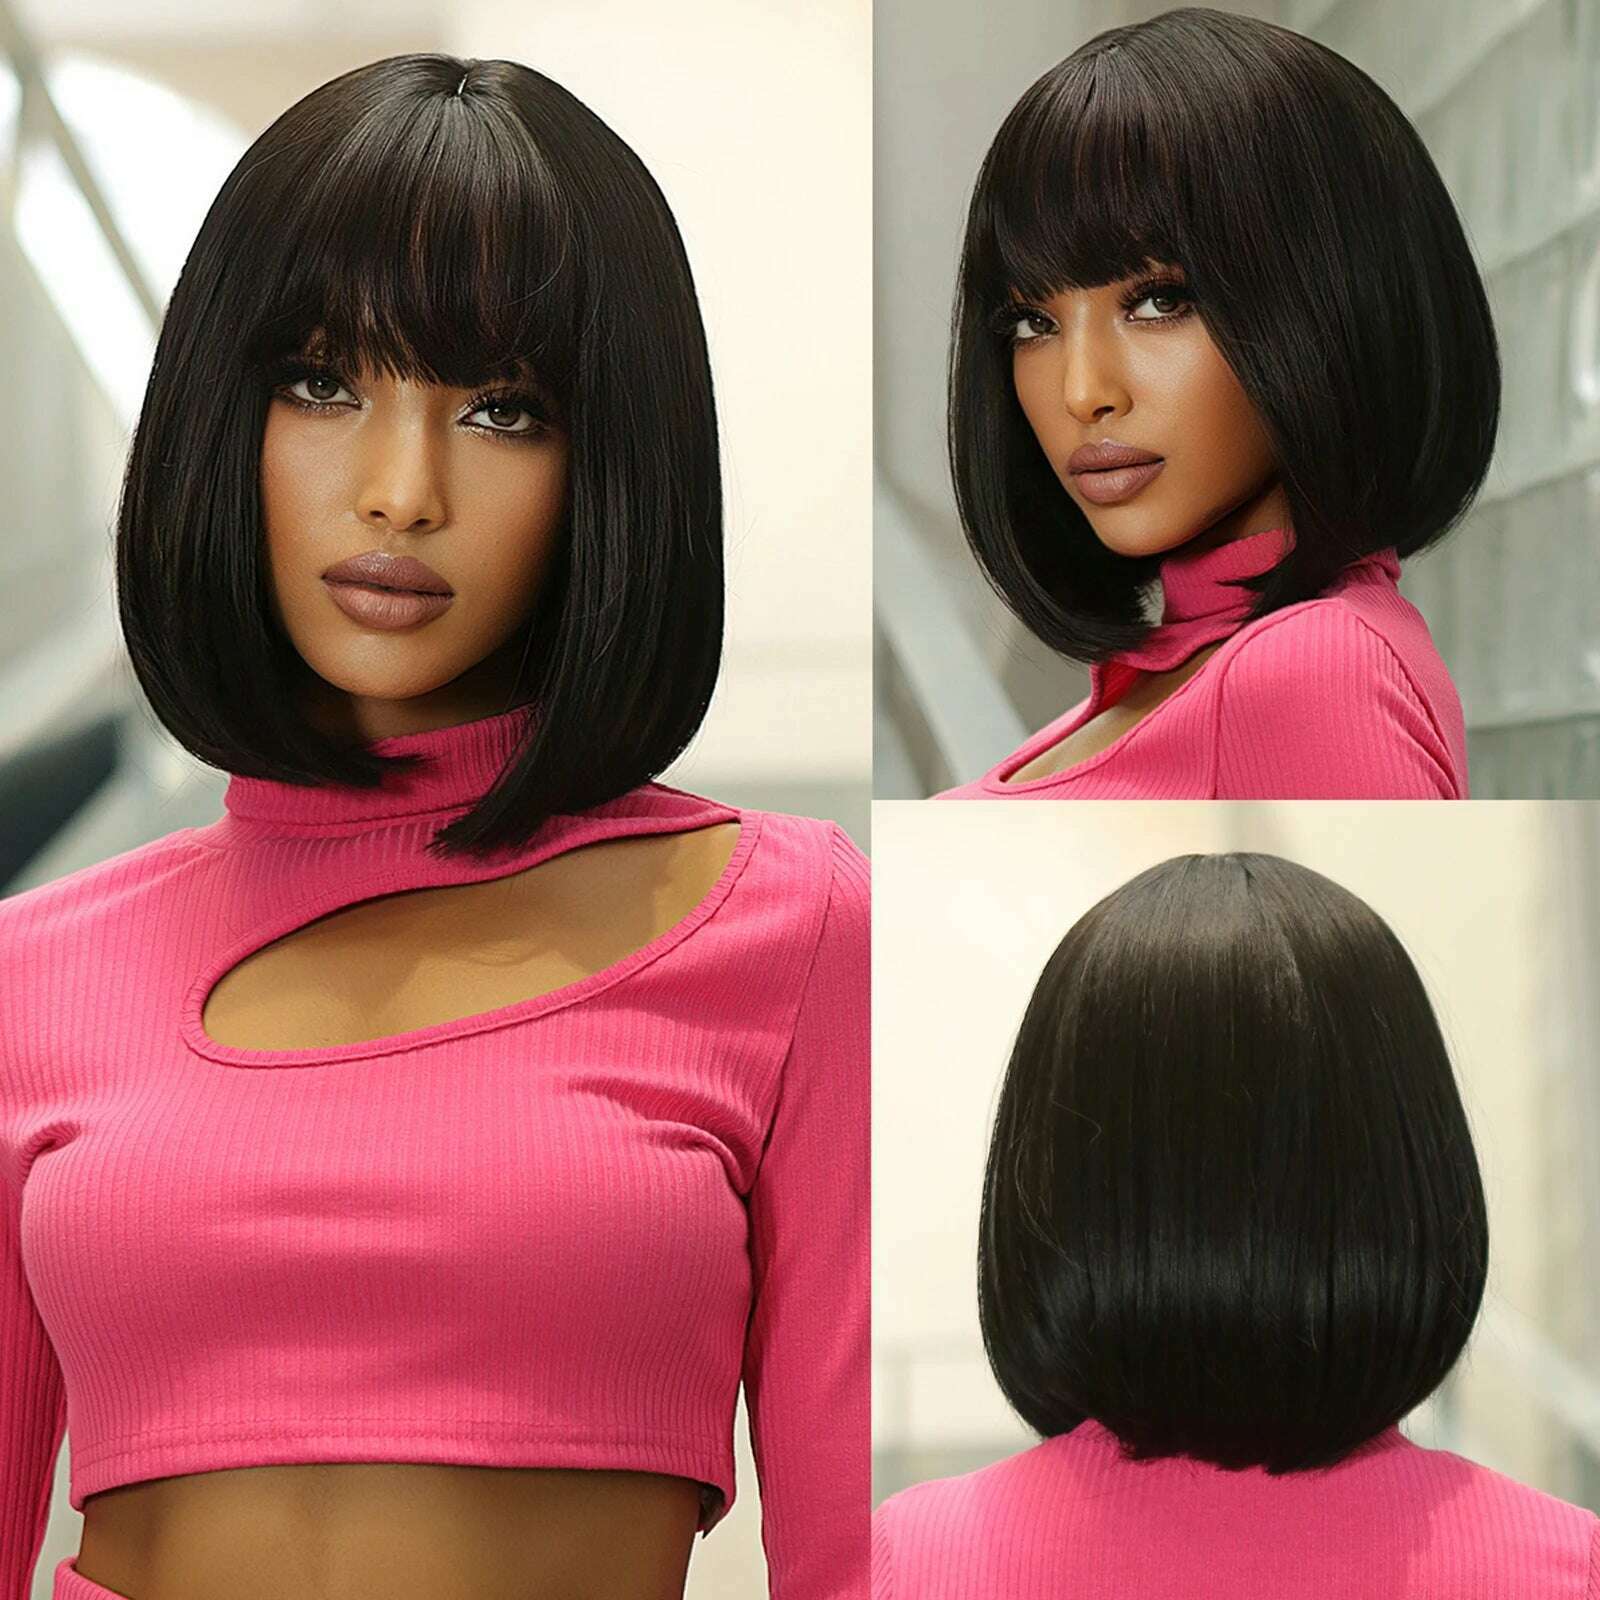 KIMLUD, Purple Pink Ombre Black Short Straight Synthetic Wigs with Bangs Bob Wig for Women Daily Cosplay Party Heat Resistant Fake Hairs, WL1081-1 / China, KIMLUD Women's Clothes